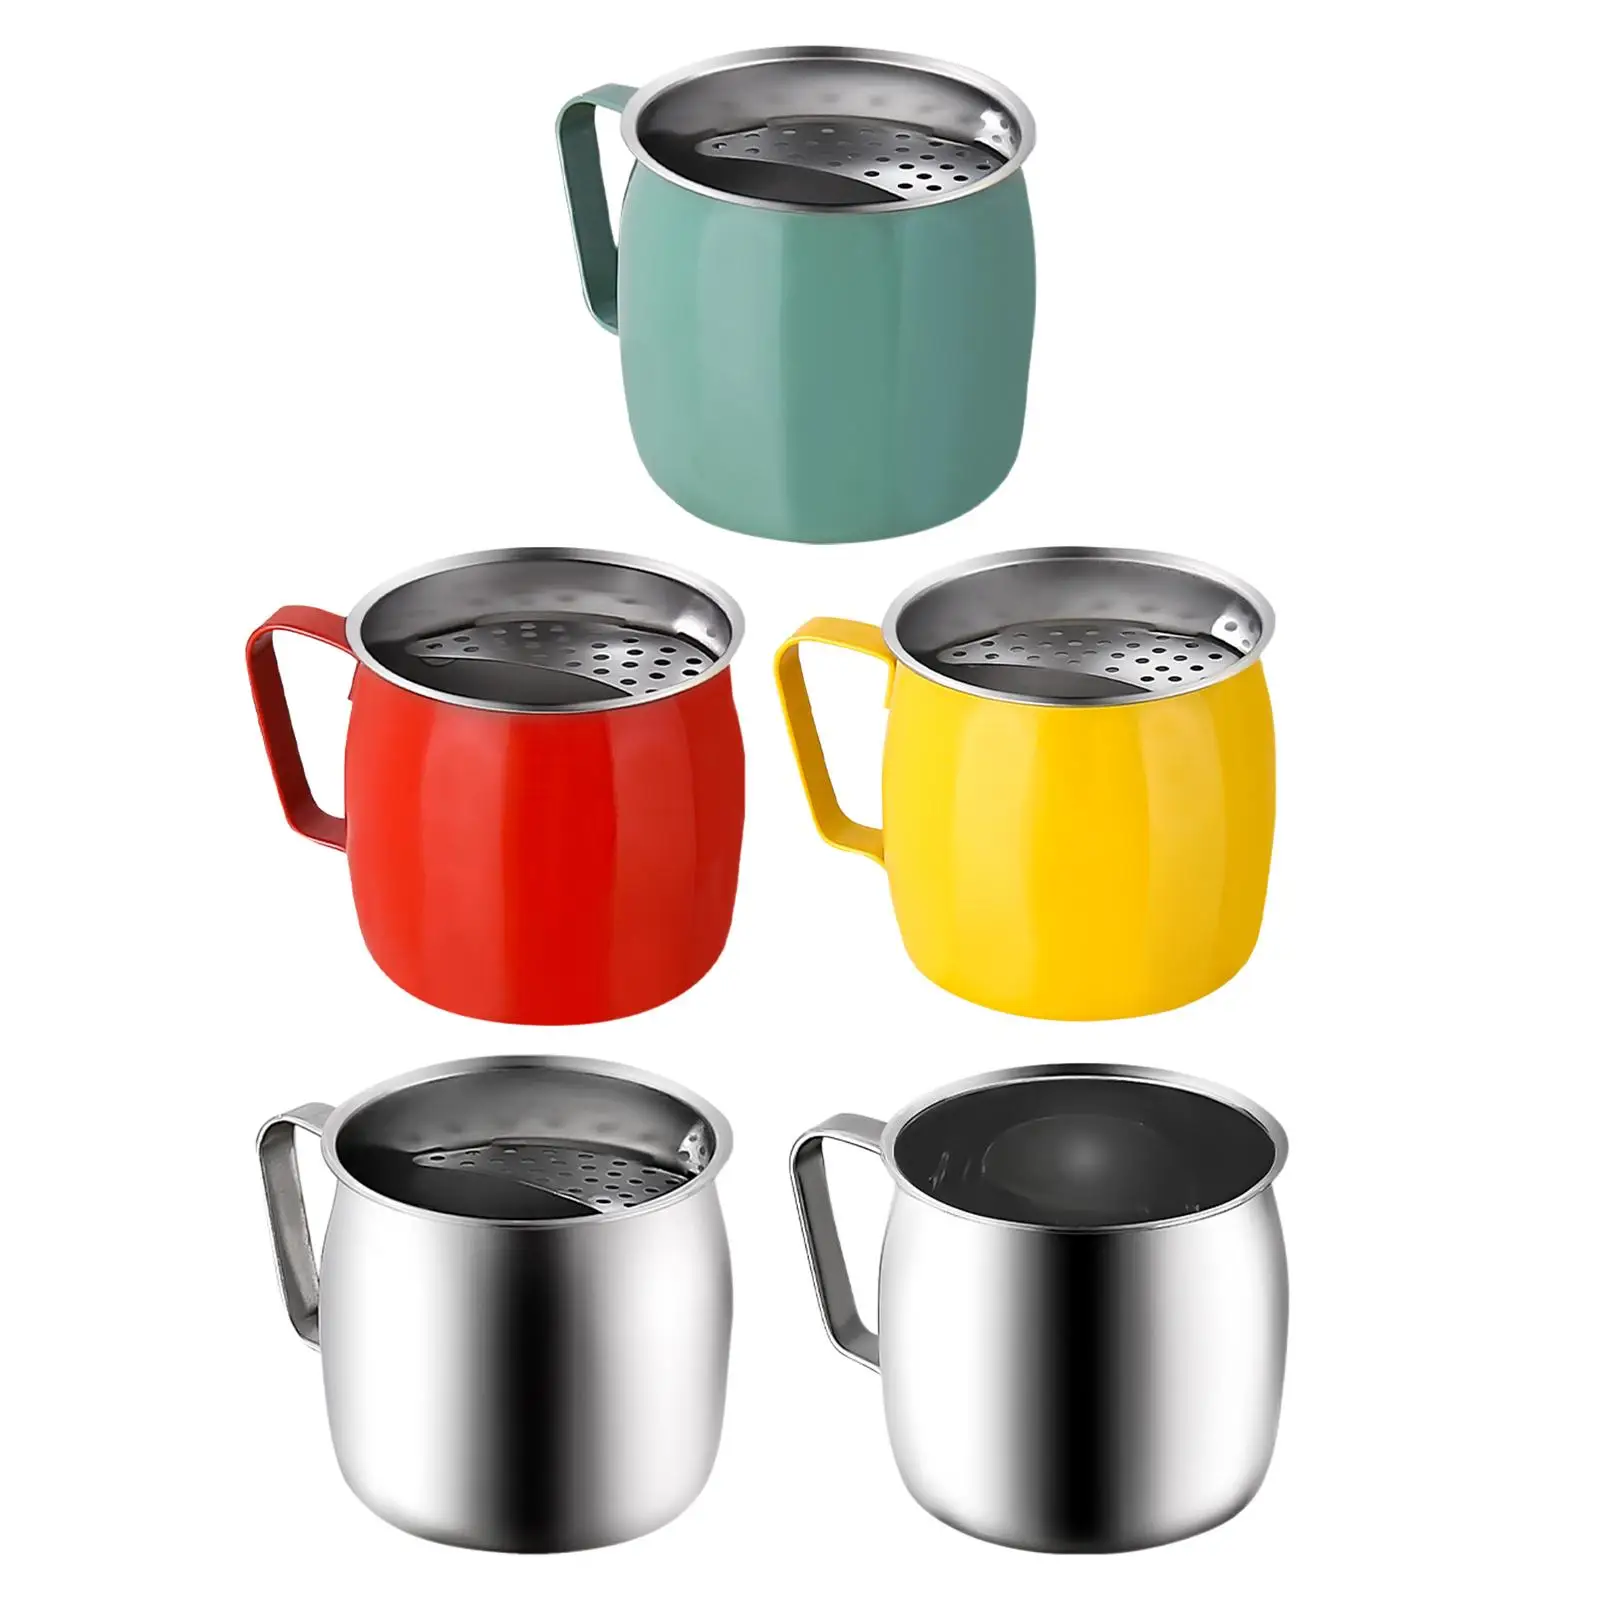 Stainless Steel Tea Cup Multi Use with Filter Reusable Durable Tea Water Separation Creative Drinking Cup for Home Office Party